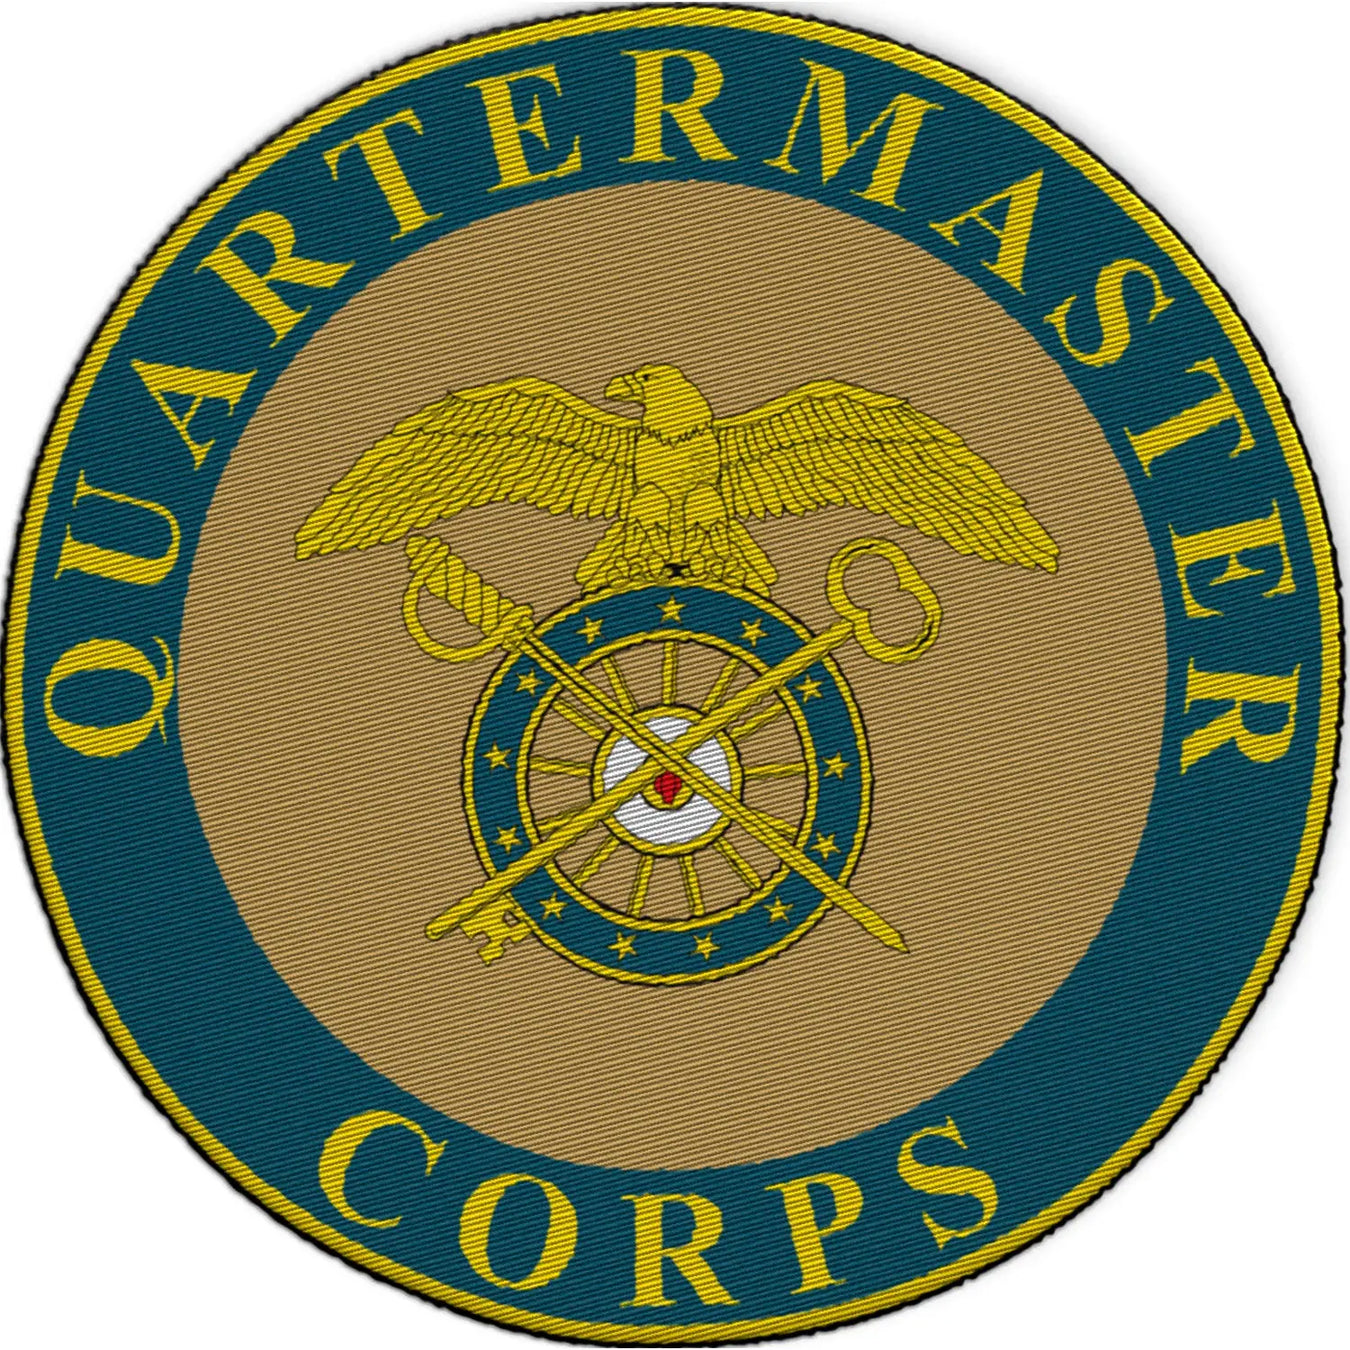 U.S. Army Quartermaster Corps Patches